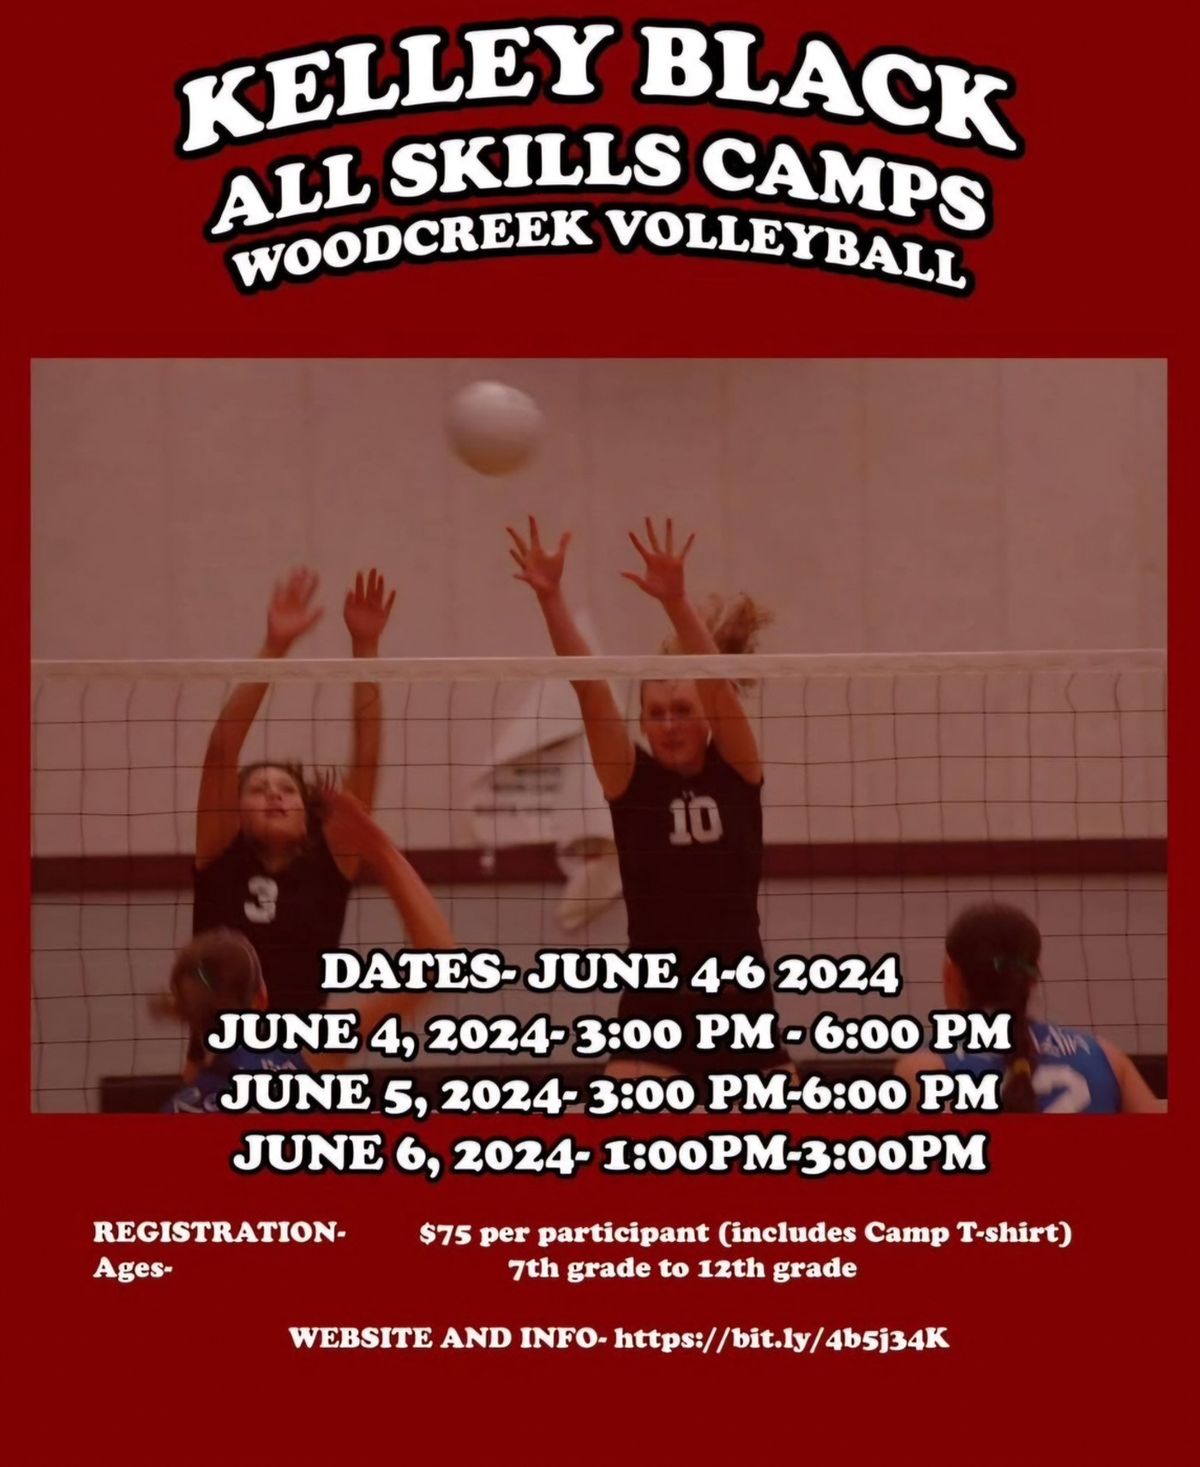 Summer Camp ~ Kelley Black Skill Camp for Volleyball